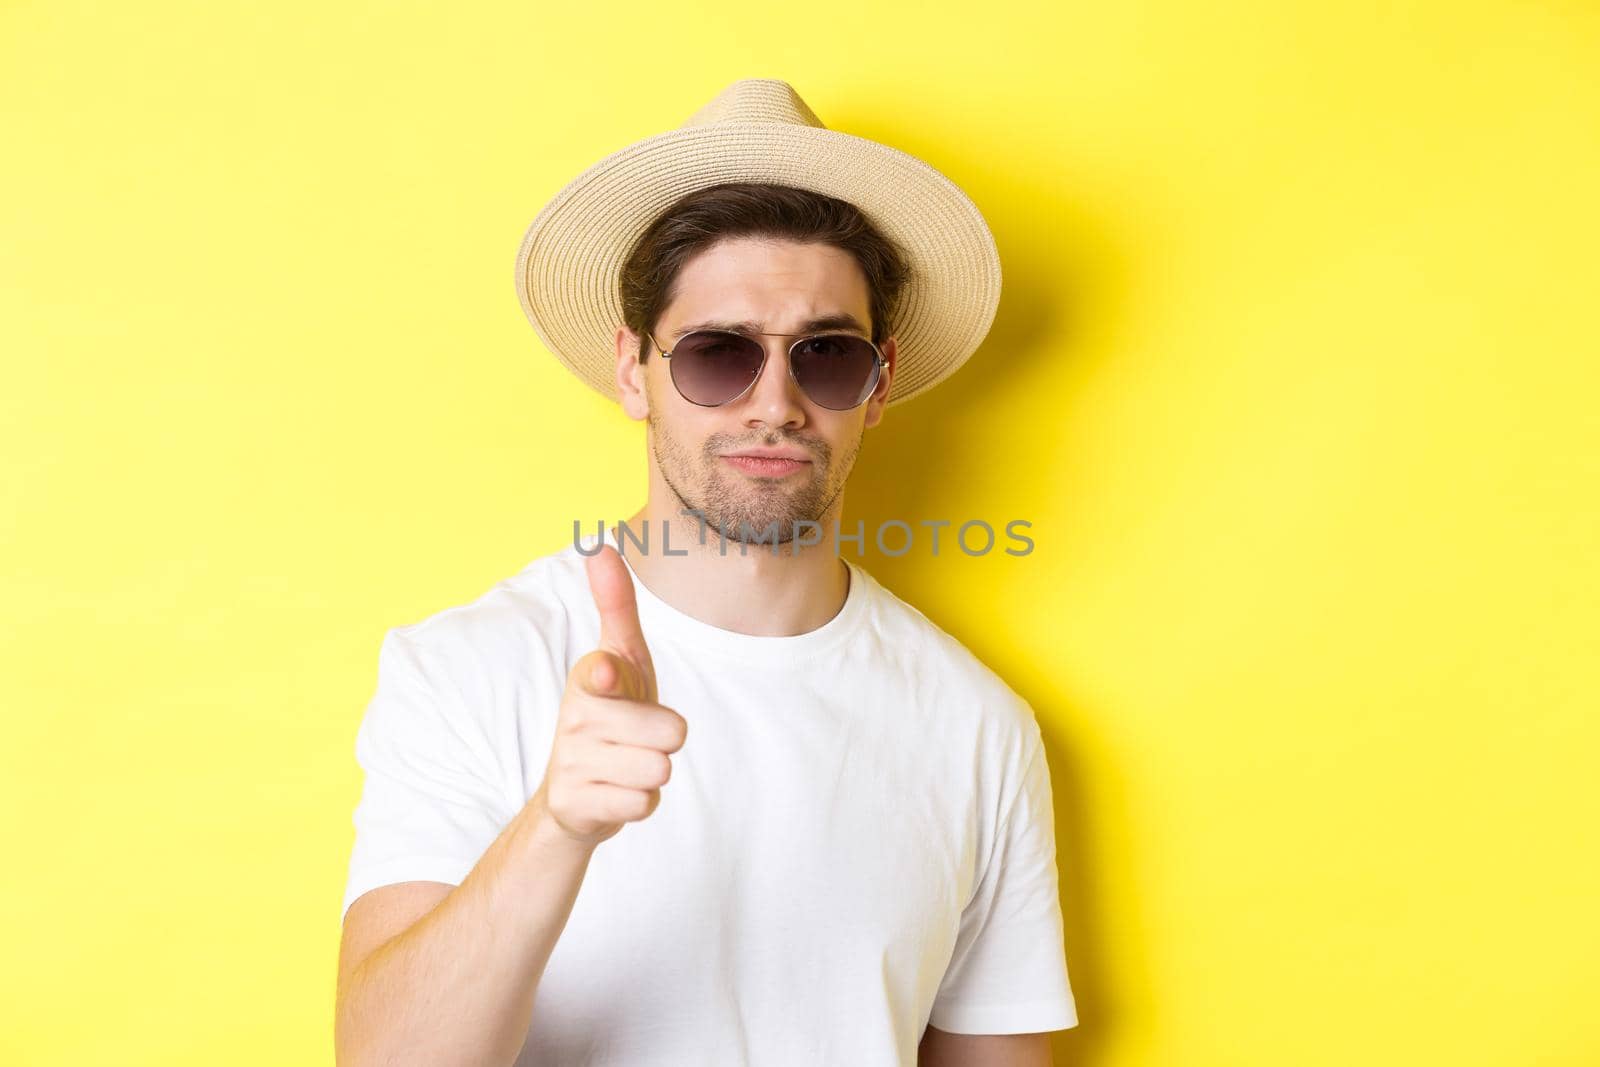 Concept of tourism and vacation. Close-up of cool guy in summer hat and sunglasses pointing finger at camera, standing over yellow background.